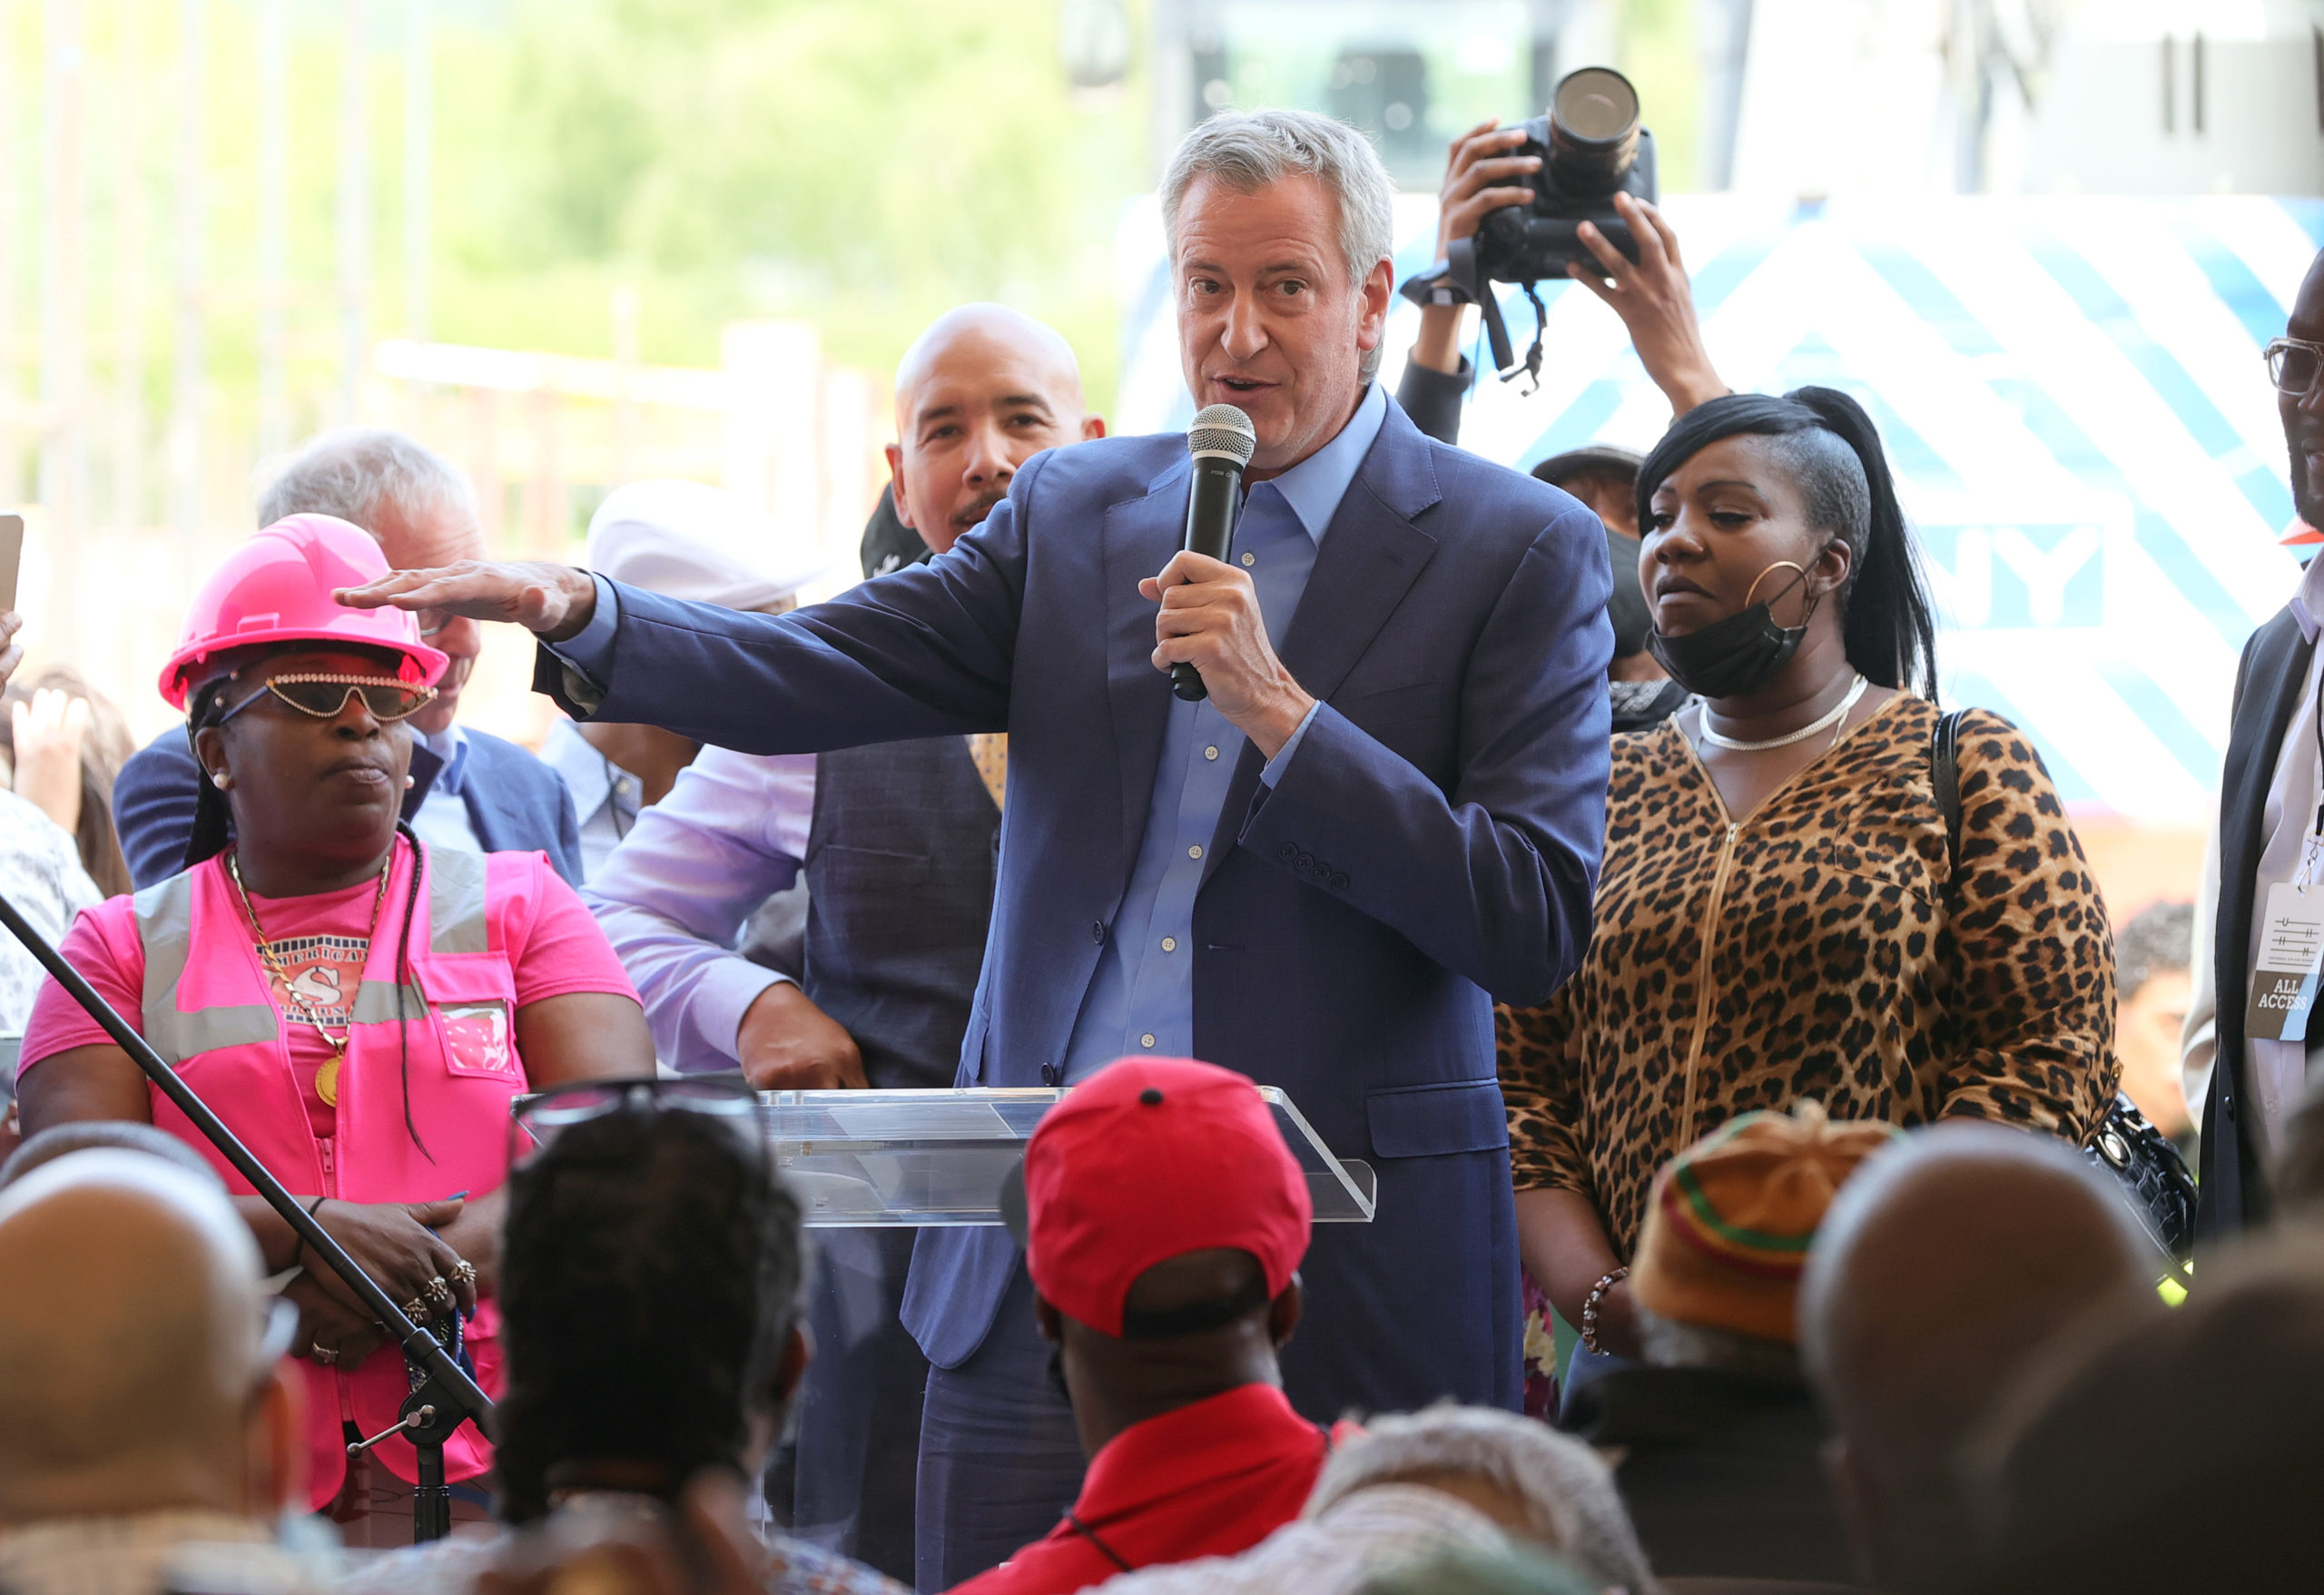 NEW YORK, NEW YORK - MAY 20: New York City Mayor Bill de Blasio speaks during The Universal Hip Hop Museum Groundbreaking Ceremony Held In Bronx Point on May 20, 2021 in New York City. (Photo by Dia Dipasupil/Getty Images)